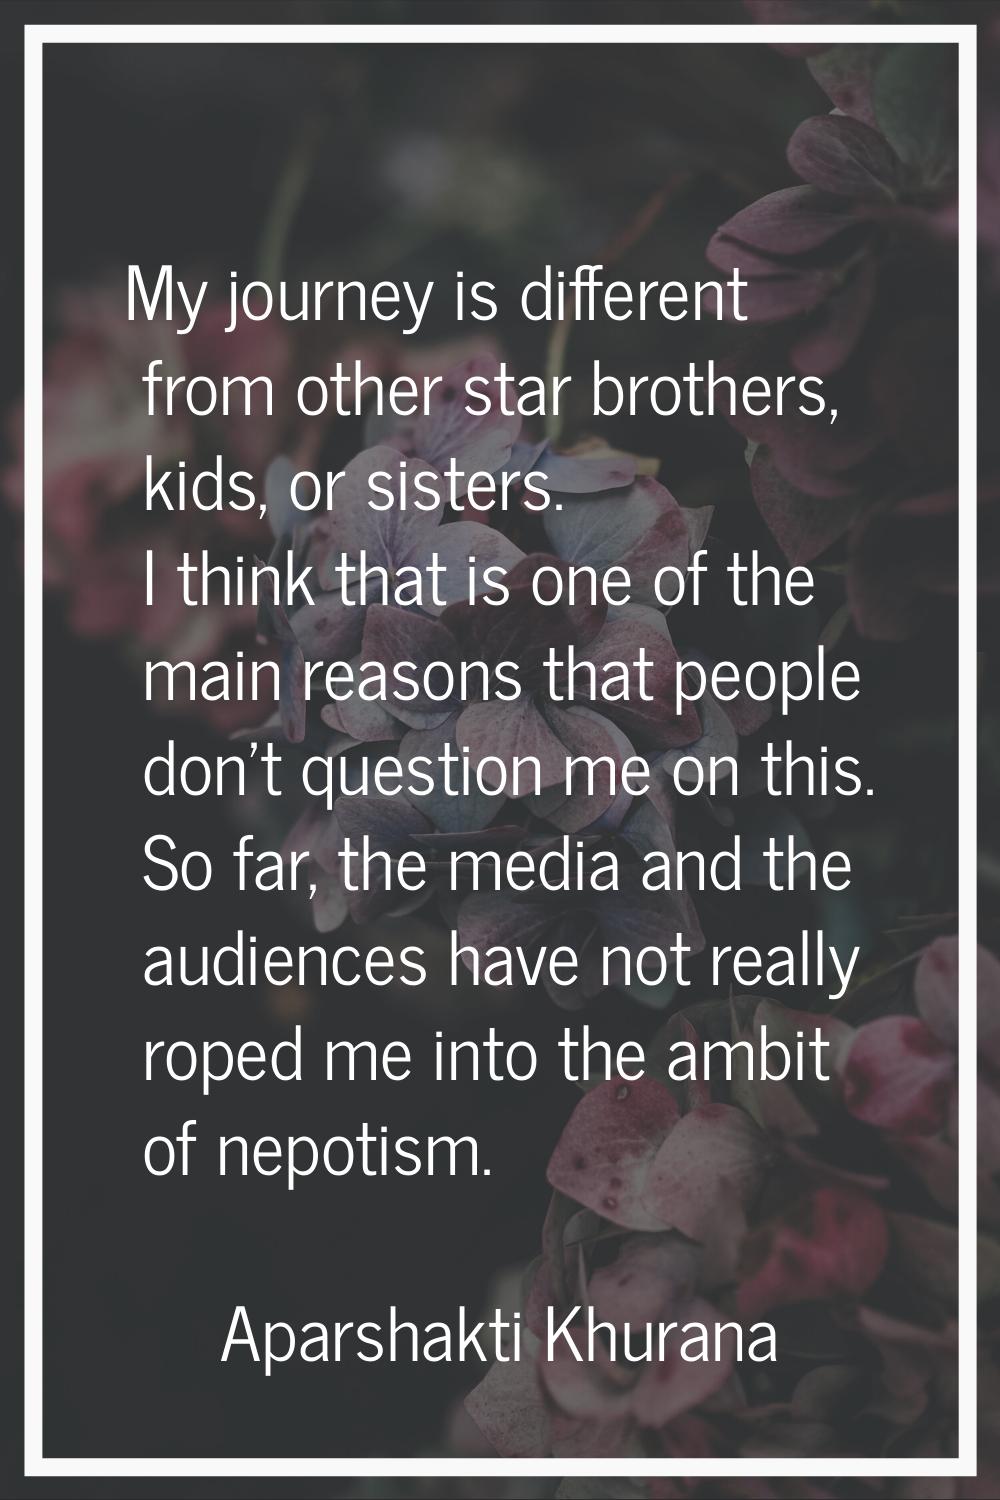 My journey is different from other star brothers, kids, or sisters. I think that is one of the main